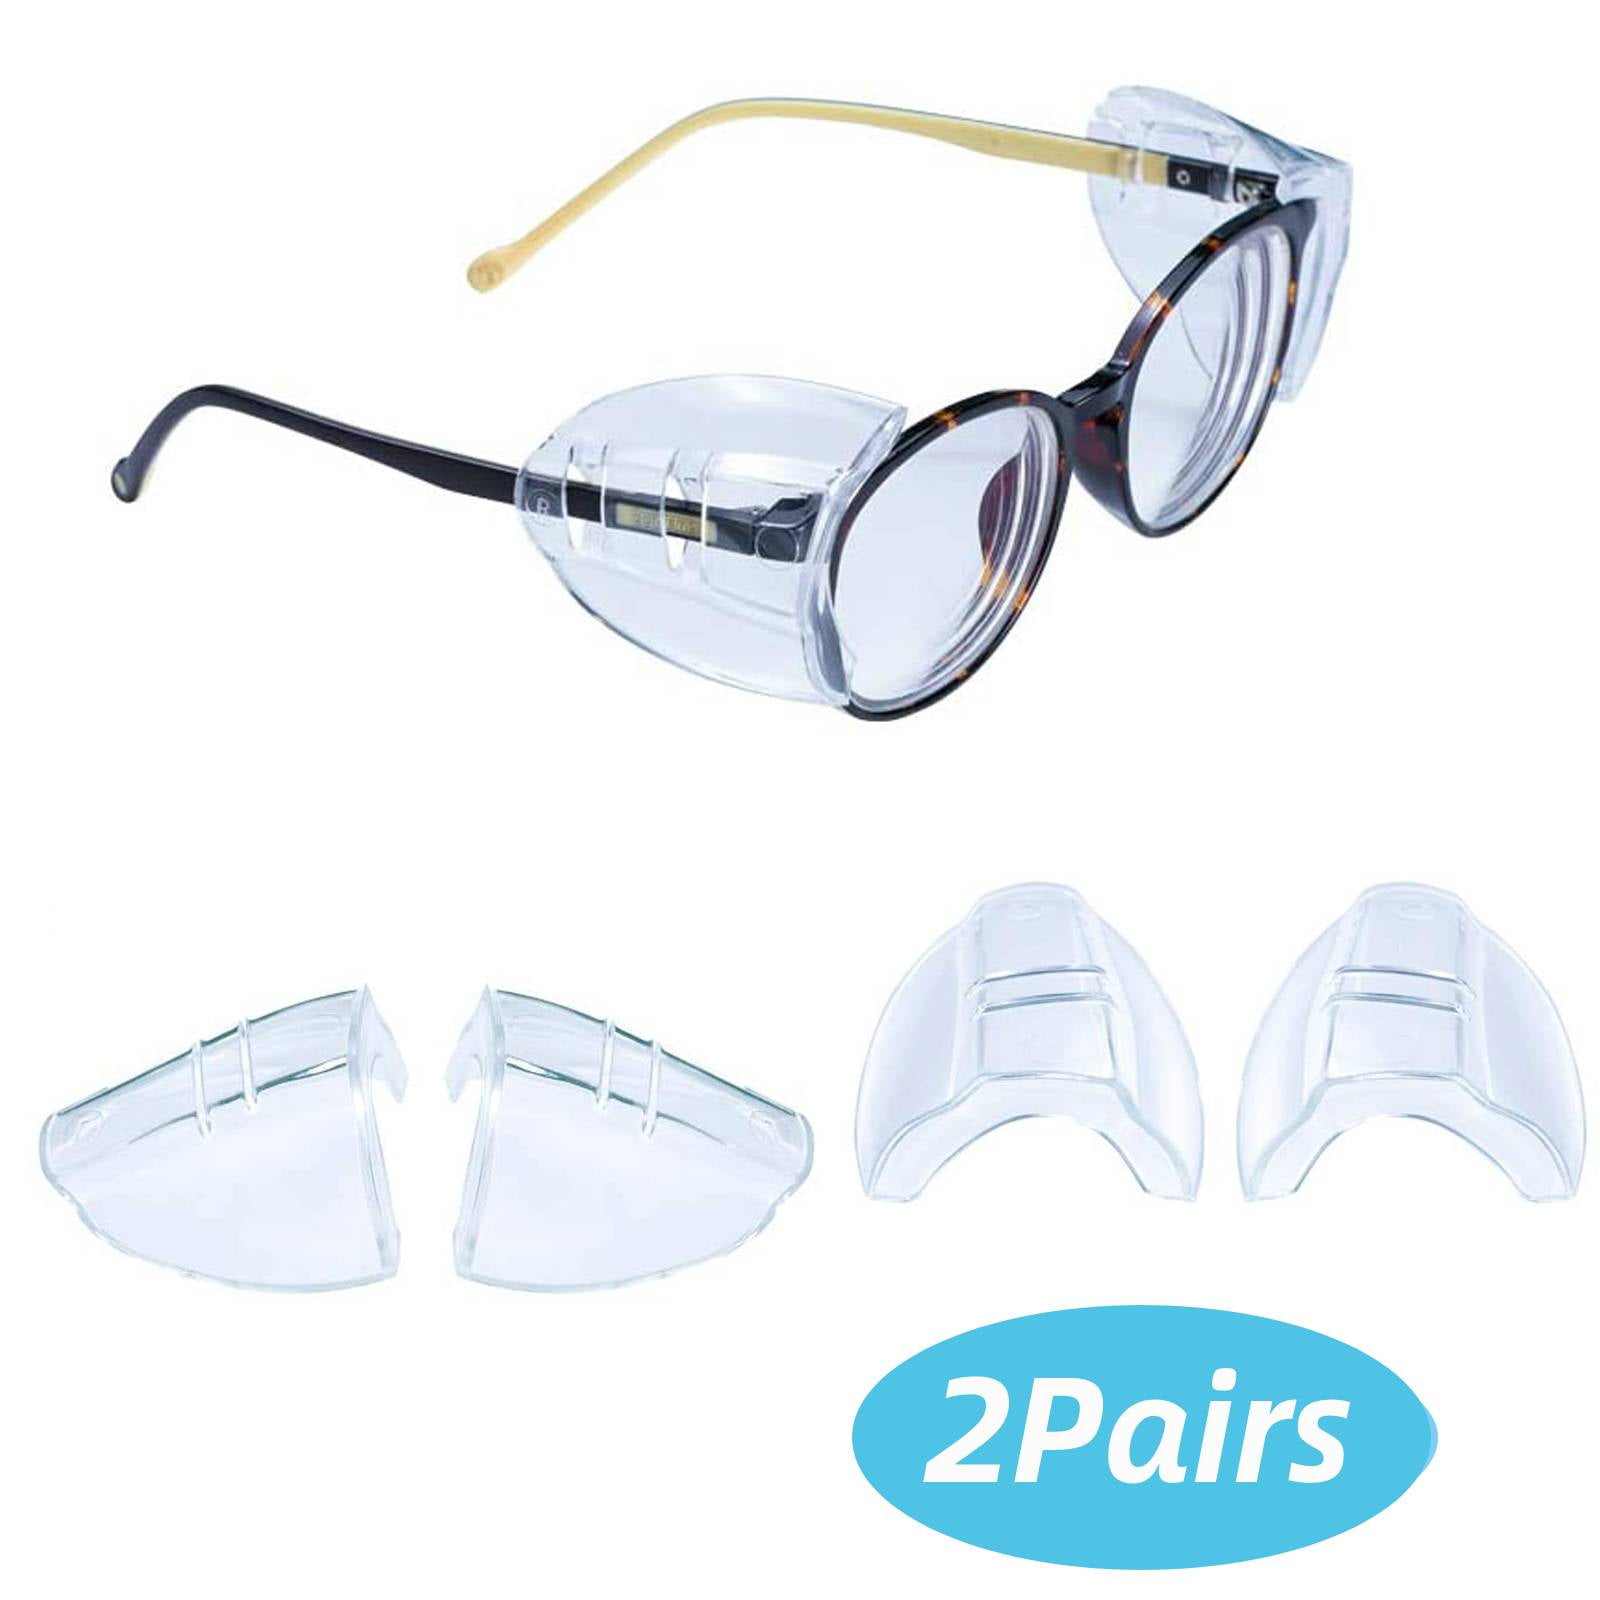 Details about   Hunting Cycling Safety Glasses Shooting Range Eye Protection Outdoor Eyewear. 